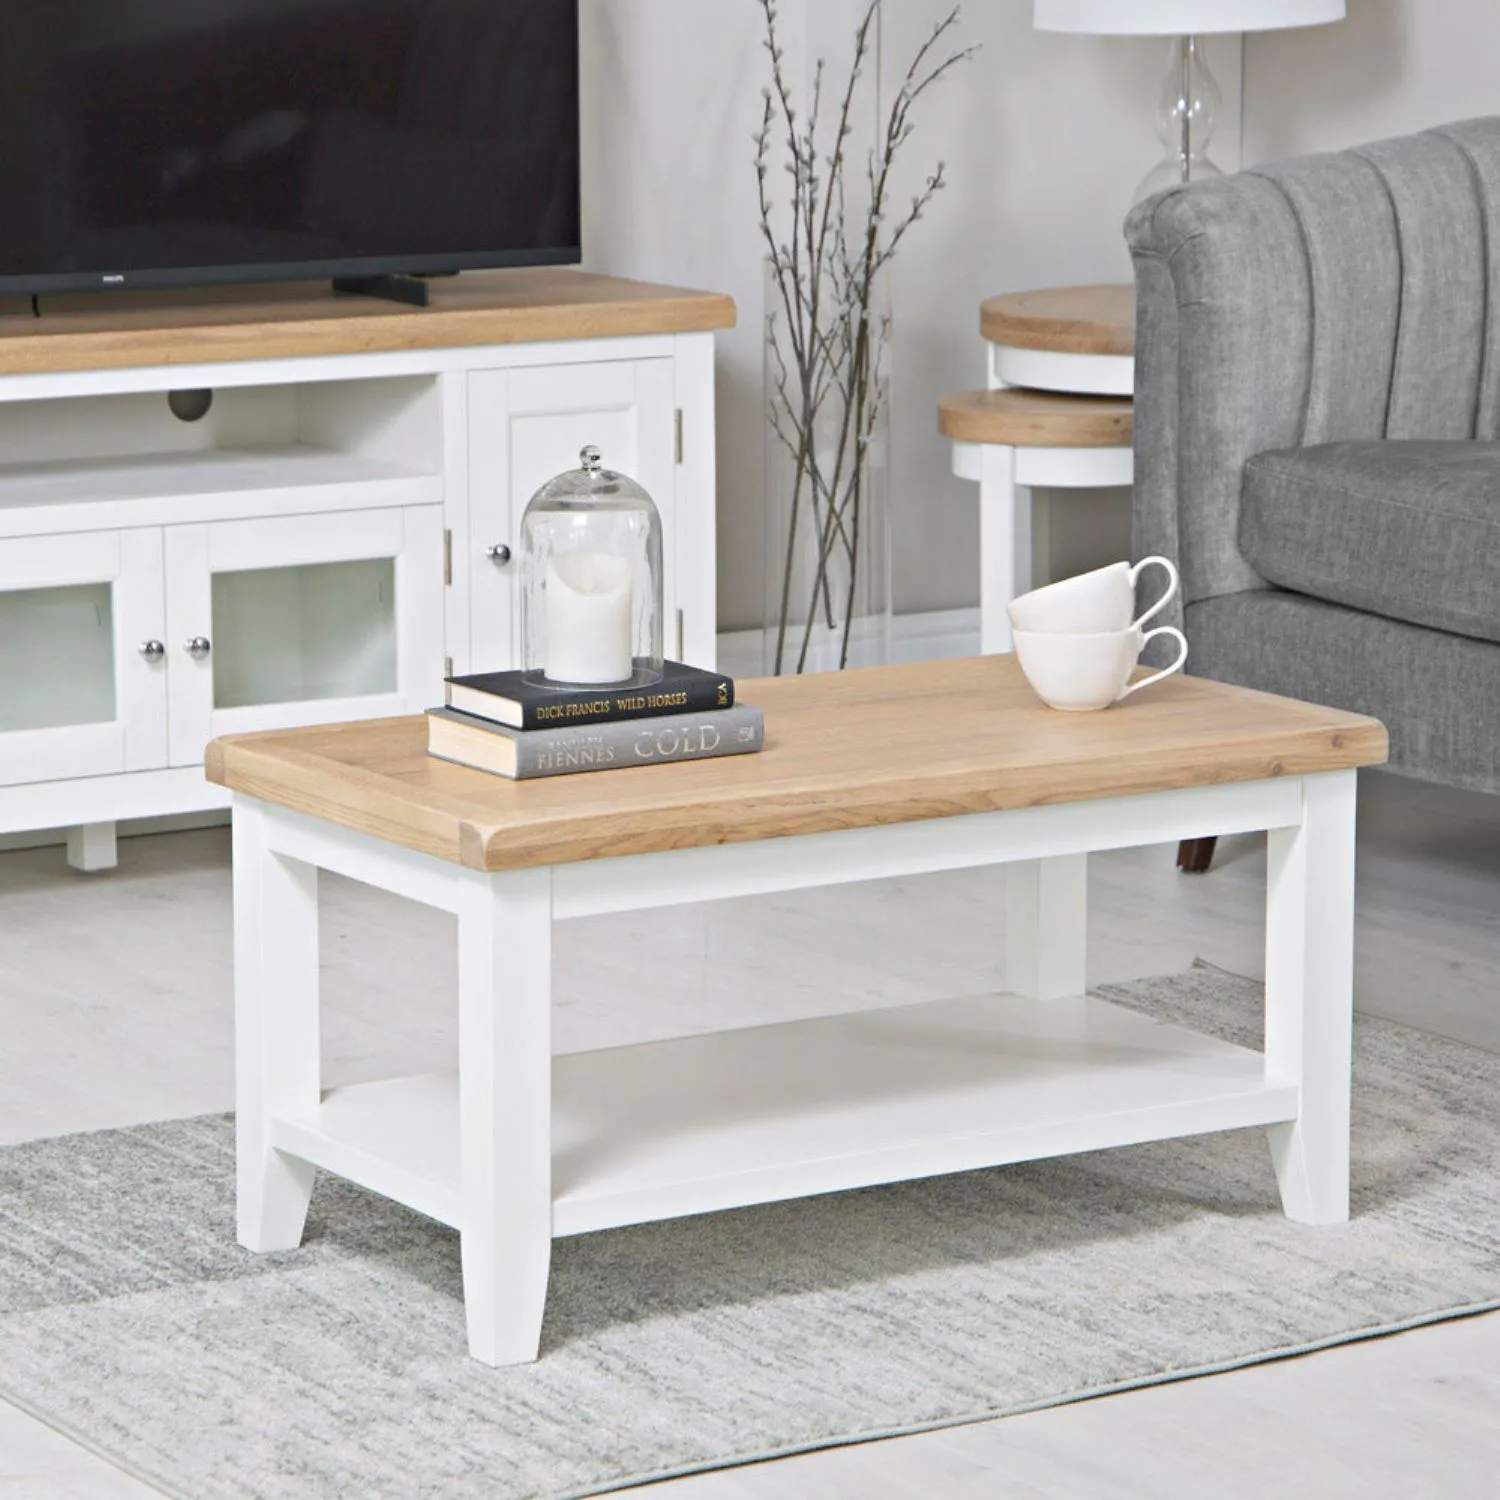 EA Dining White Small Coffee Table